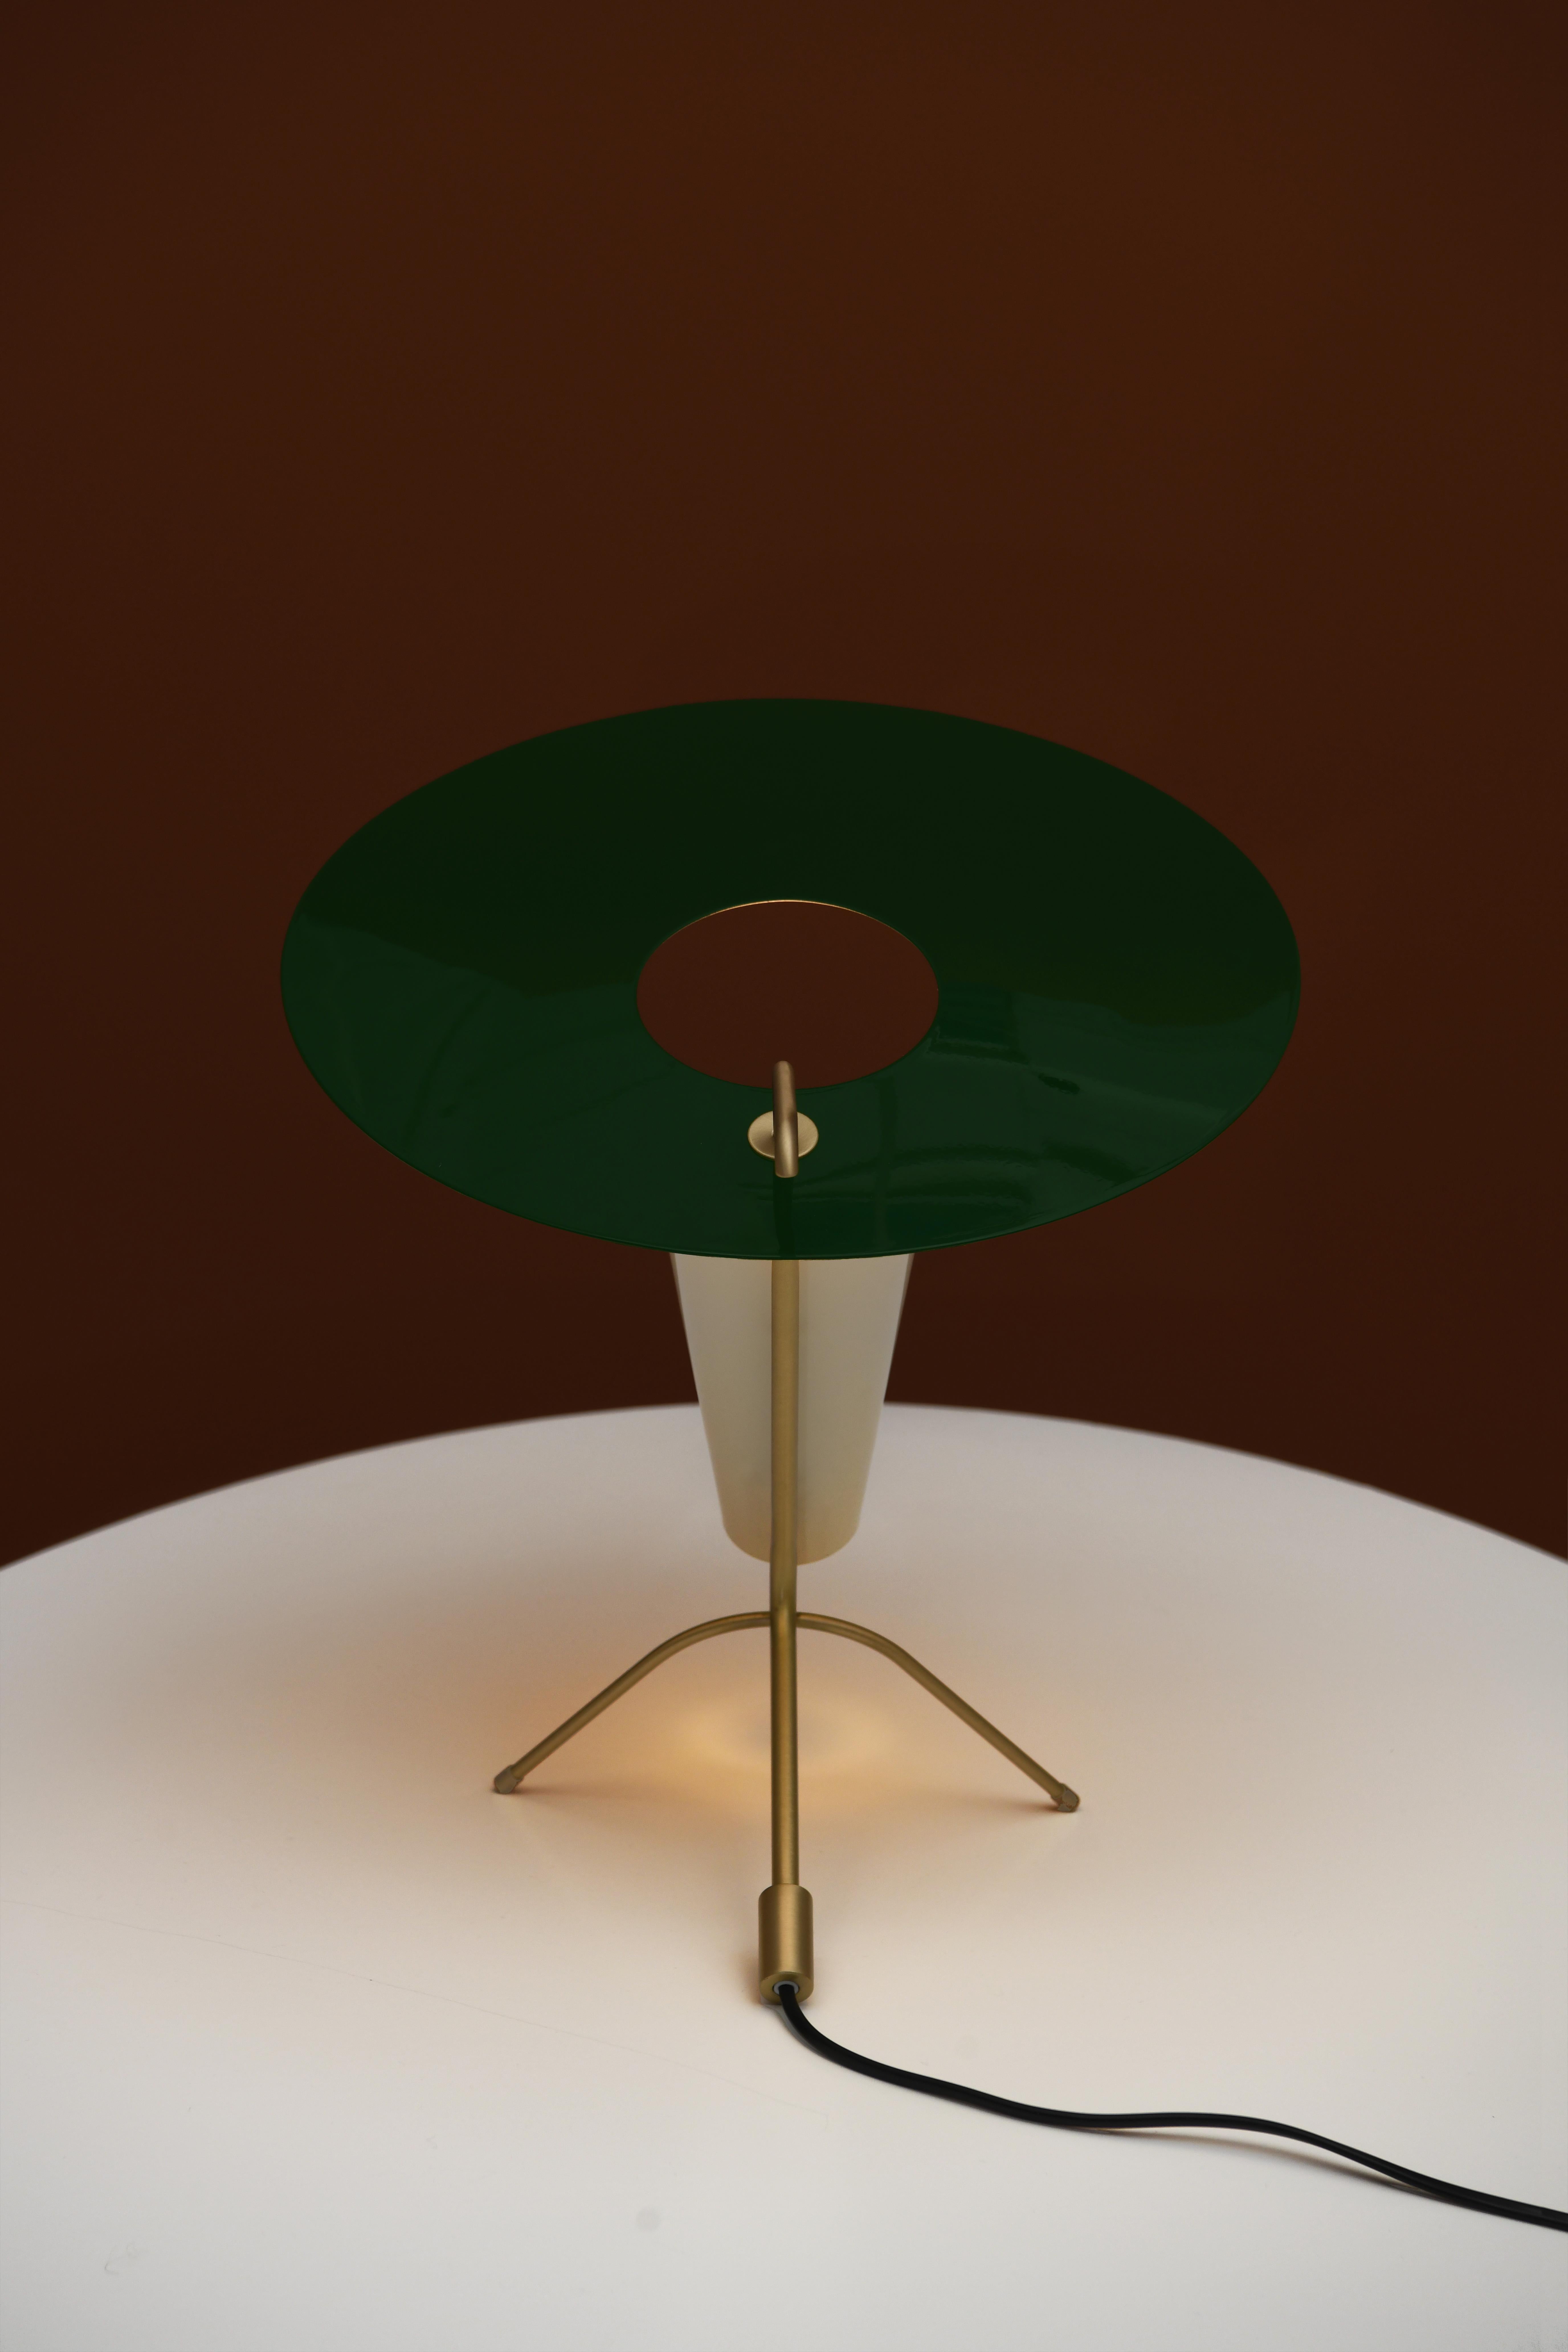 Mid-Century Modern Pierre Guariche G24 Table Lamp in Green and White for Sammode Studio For Sale